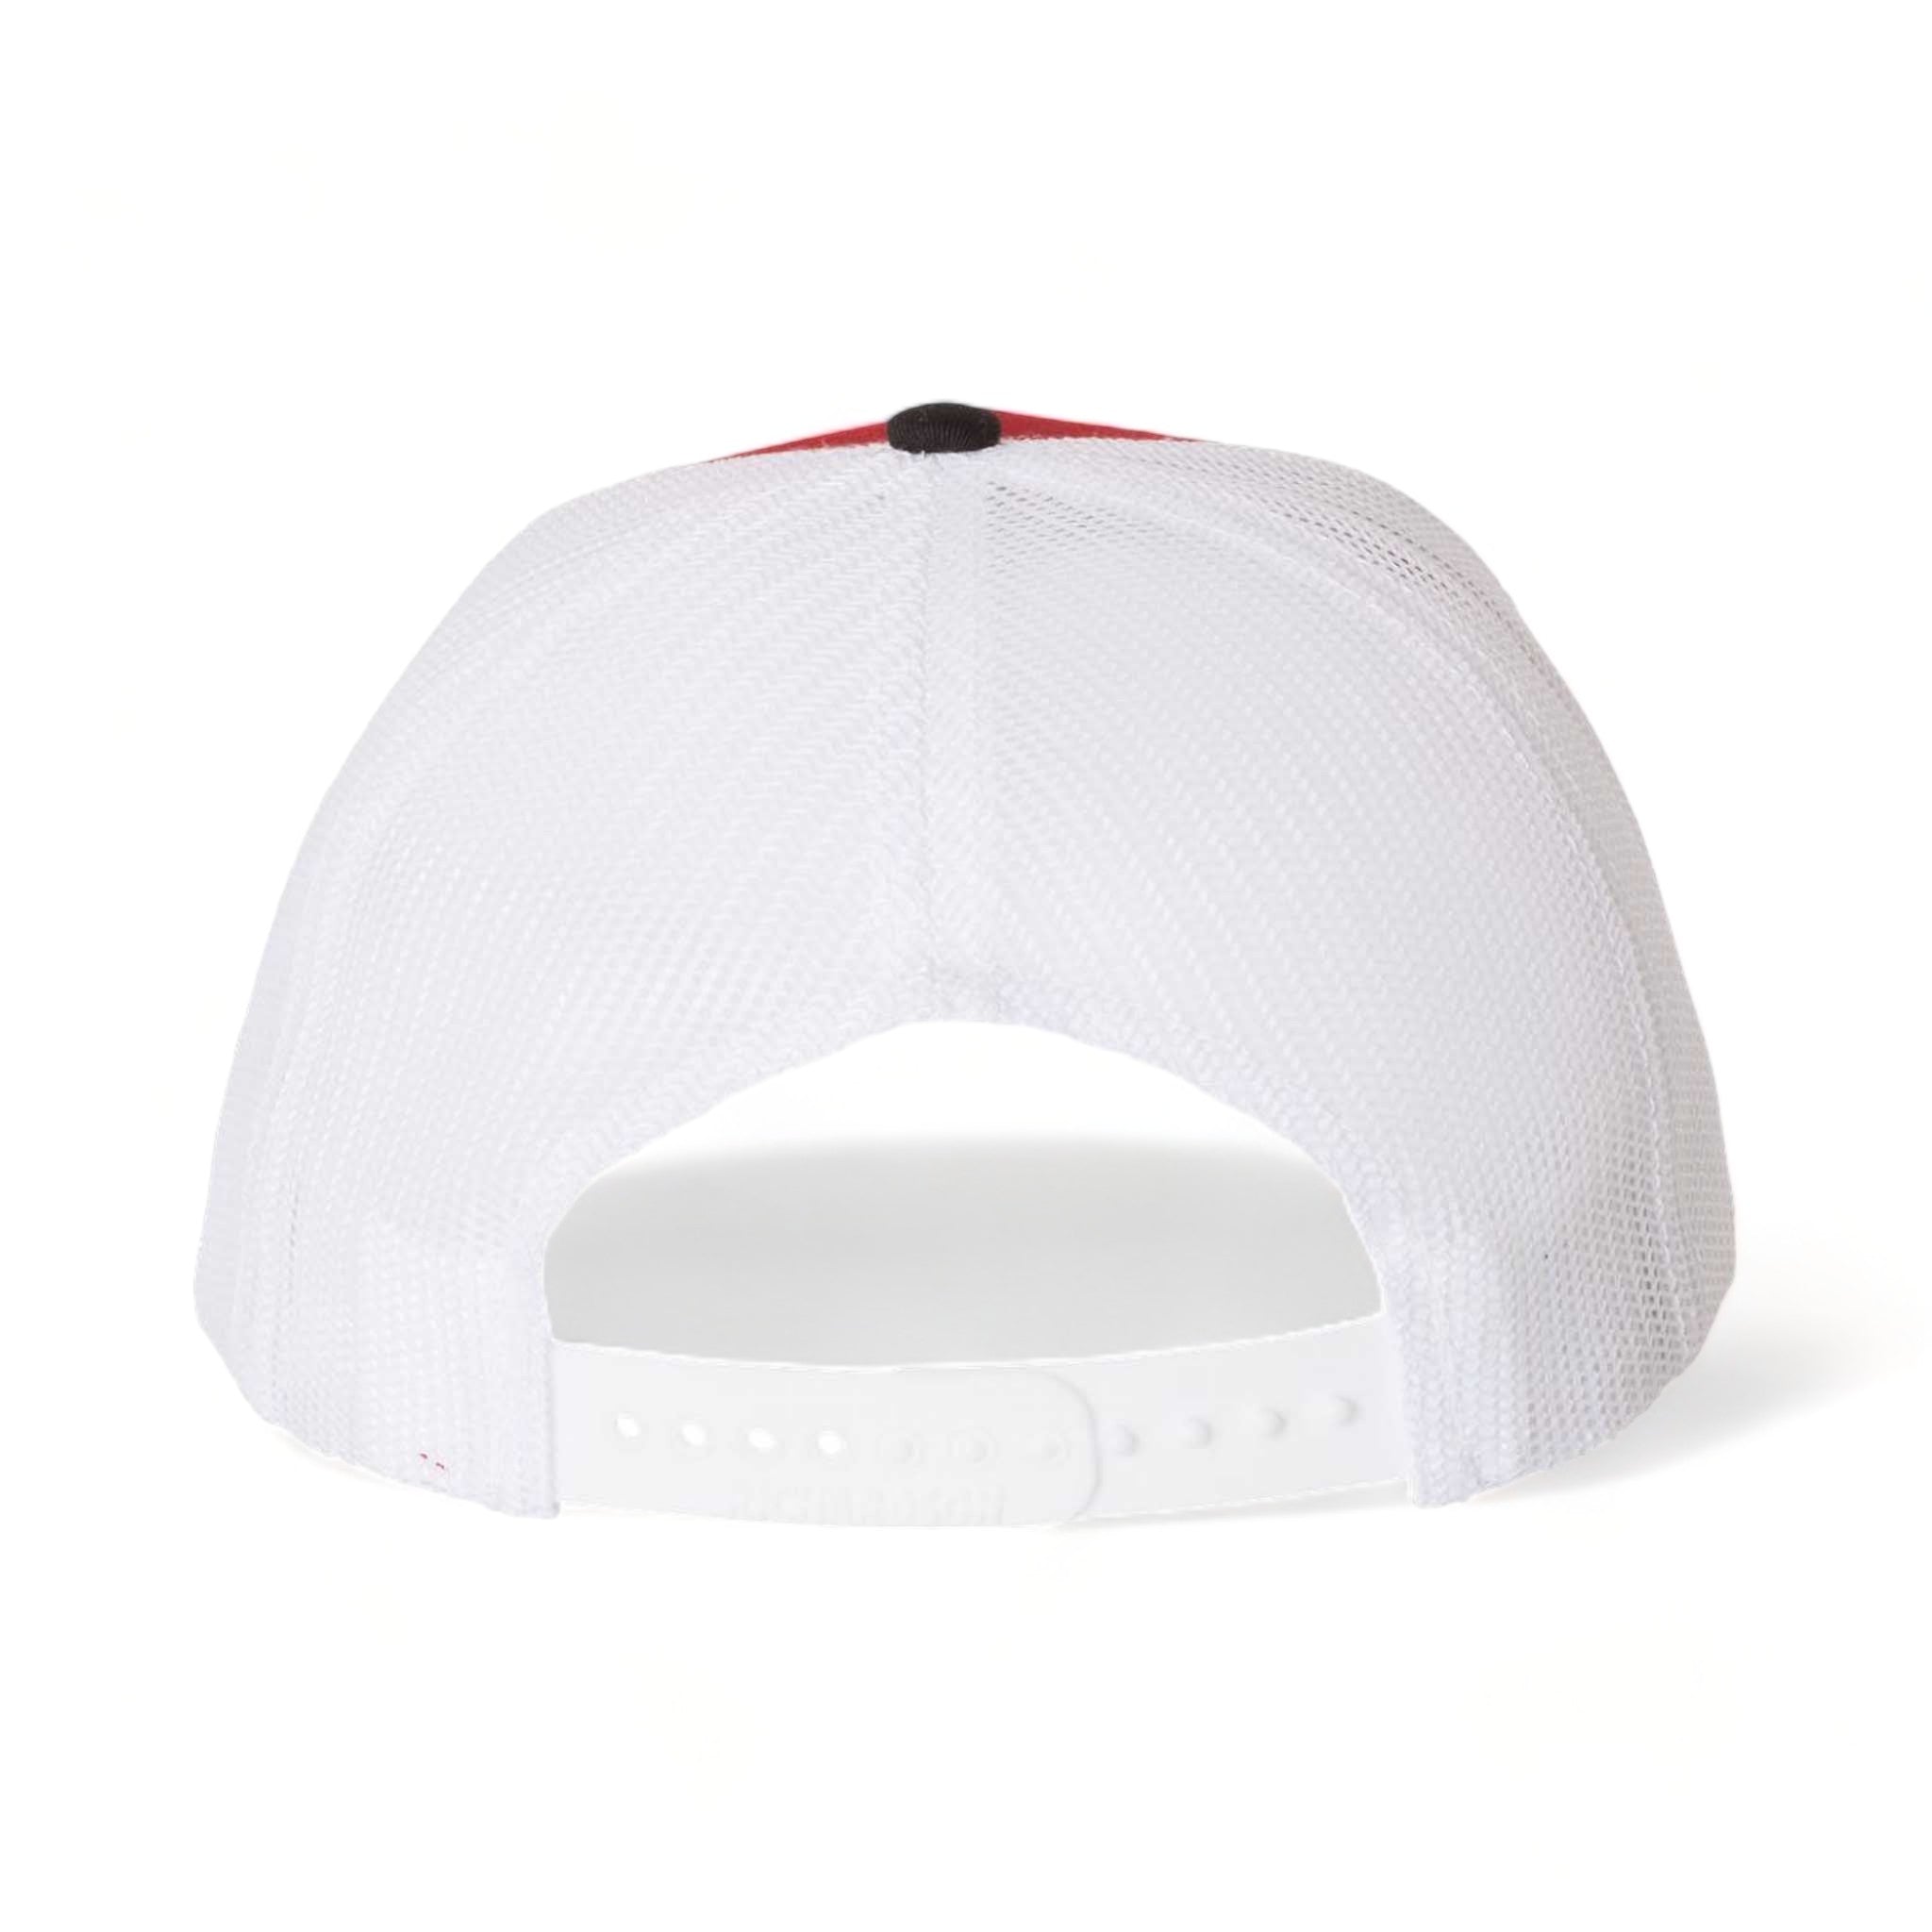 Back view of Richardson 112 custom hat in red, white and black